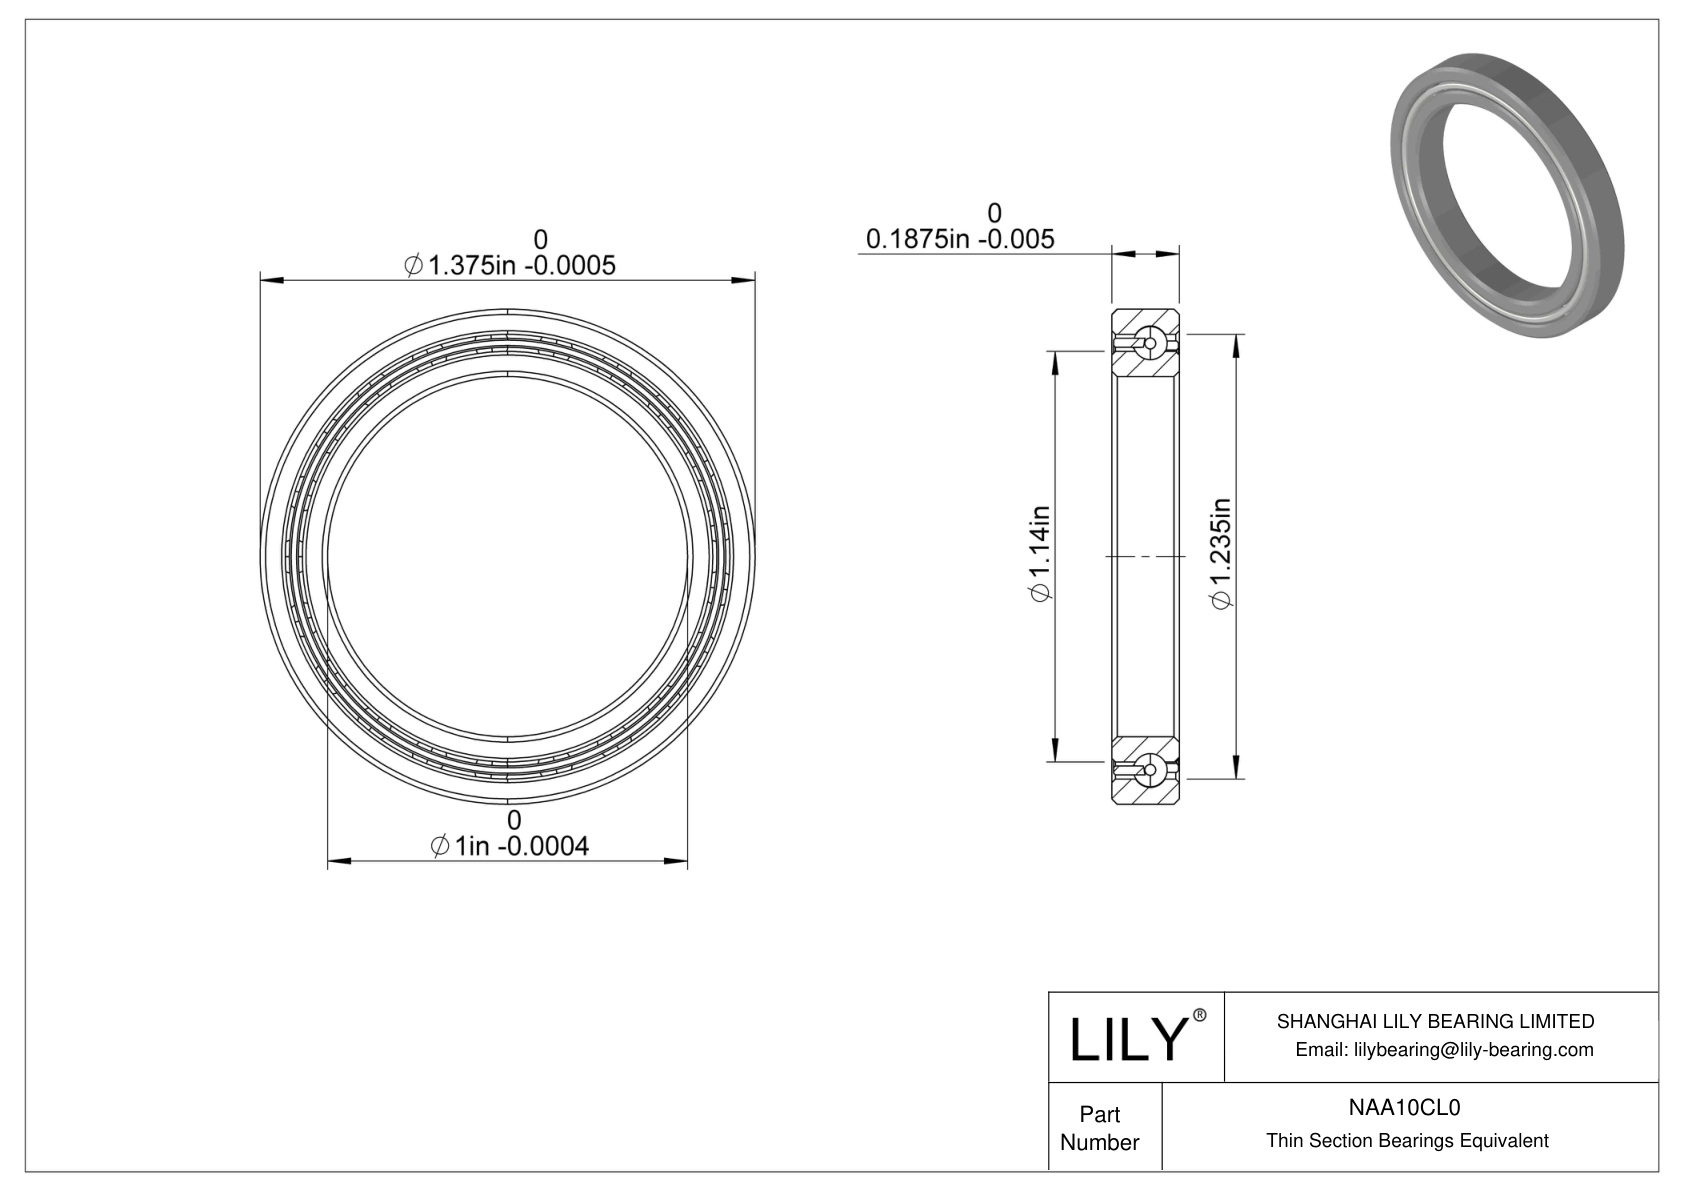 NAA10CL0 Constant Section (CS) Bearings cad drawing